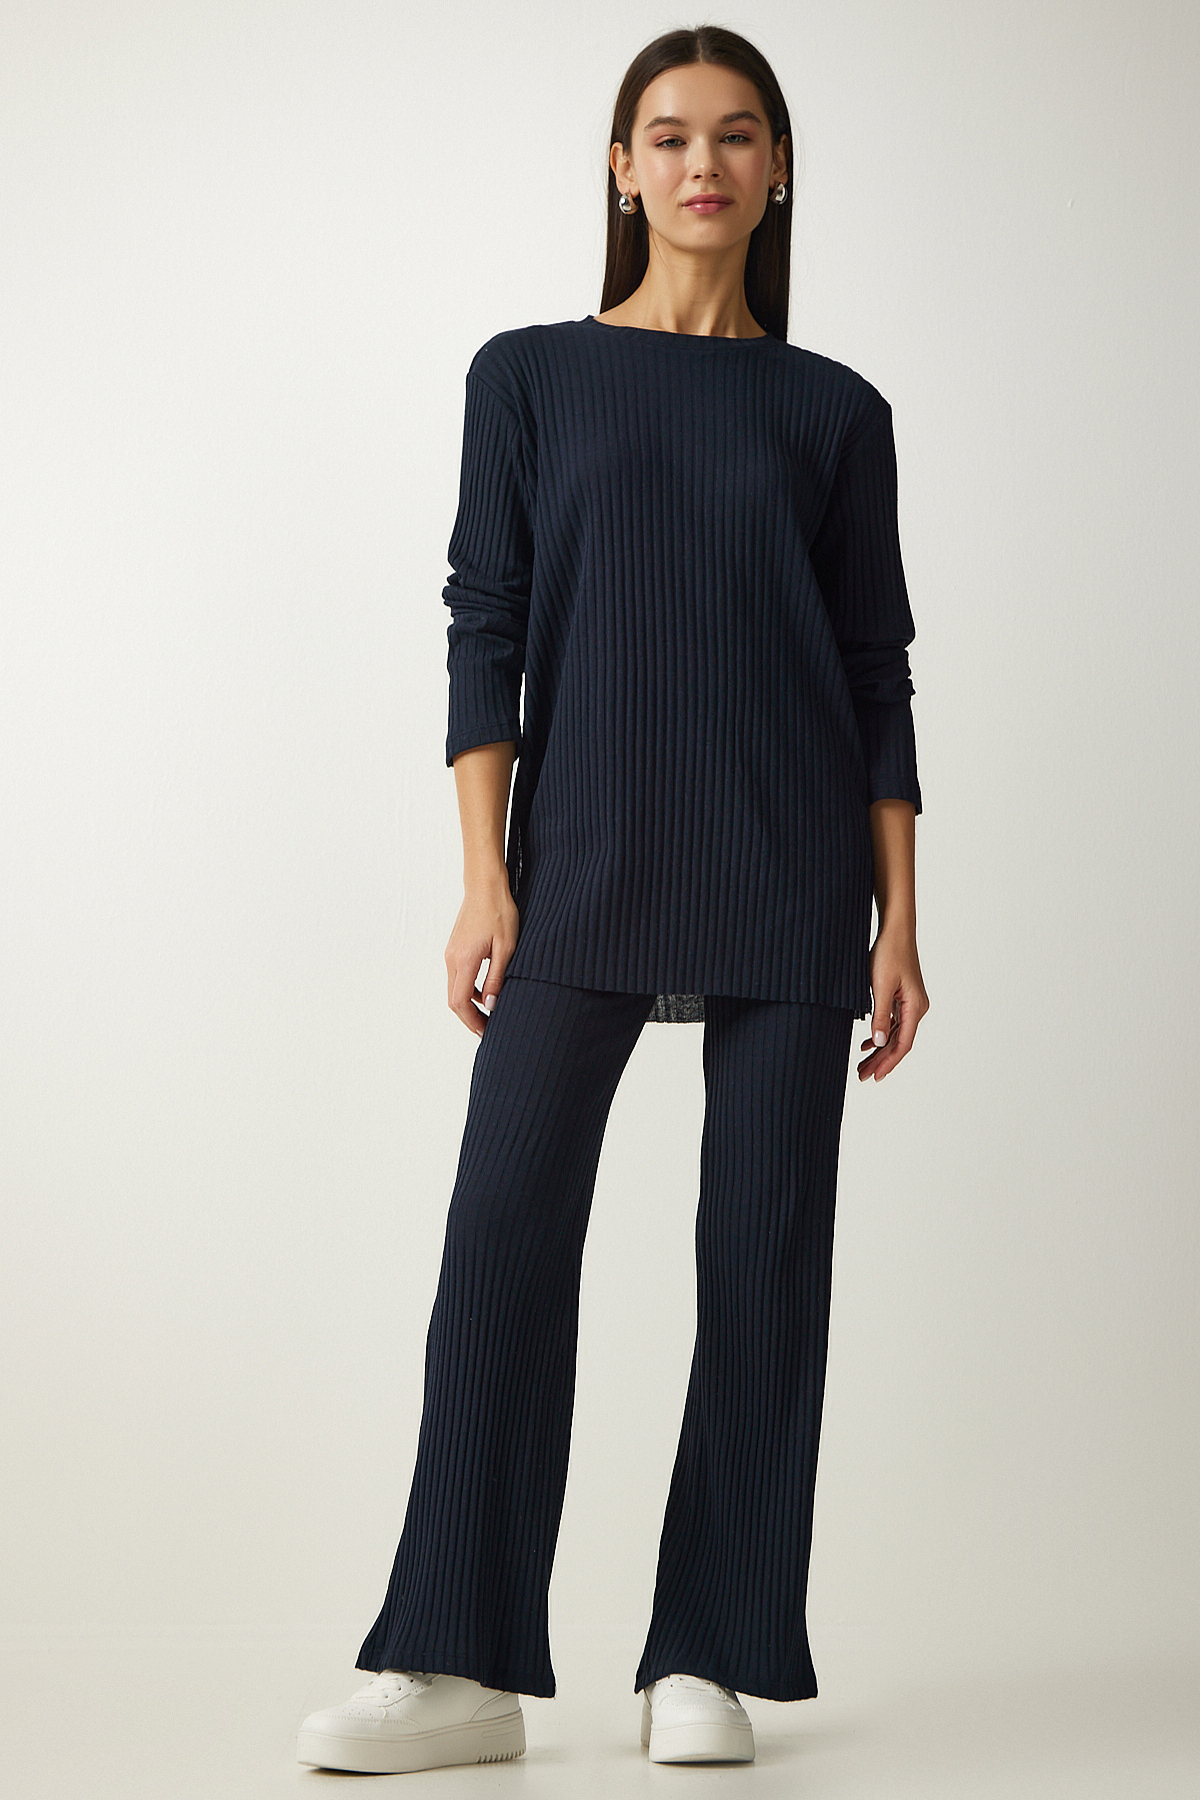 Happiness İstanbul Women's Navy Blue Corded Knitted Blouse and Trousers Set